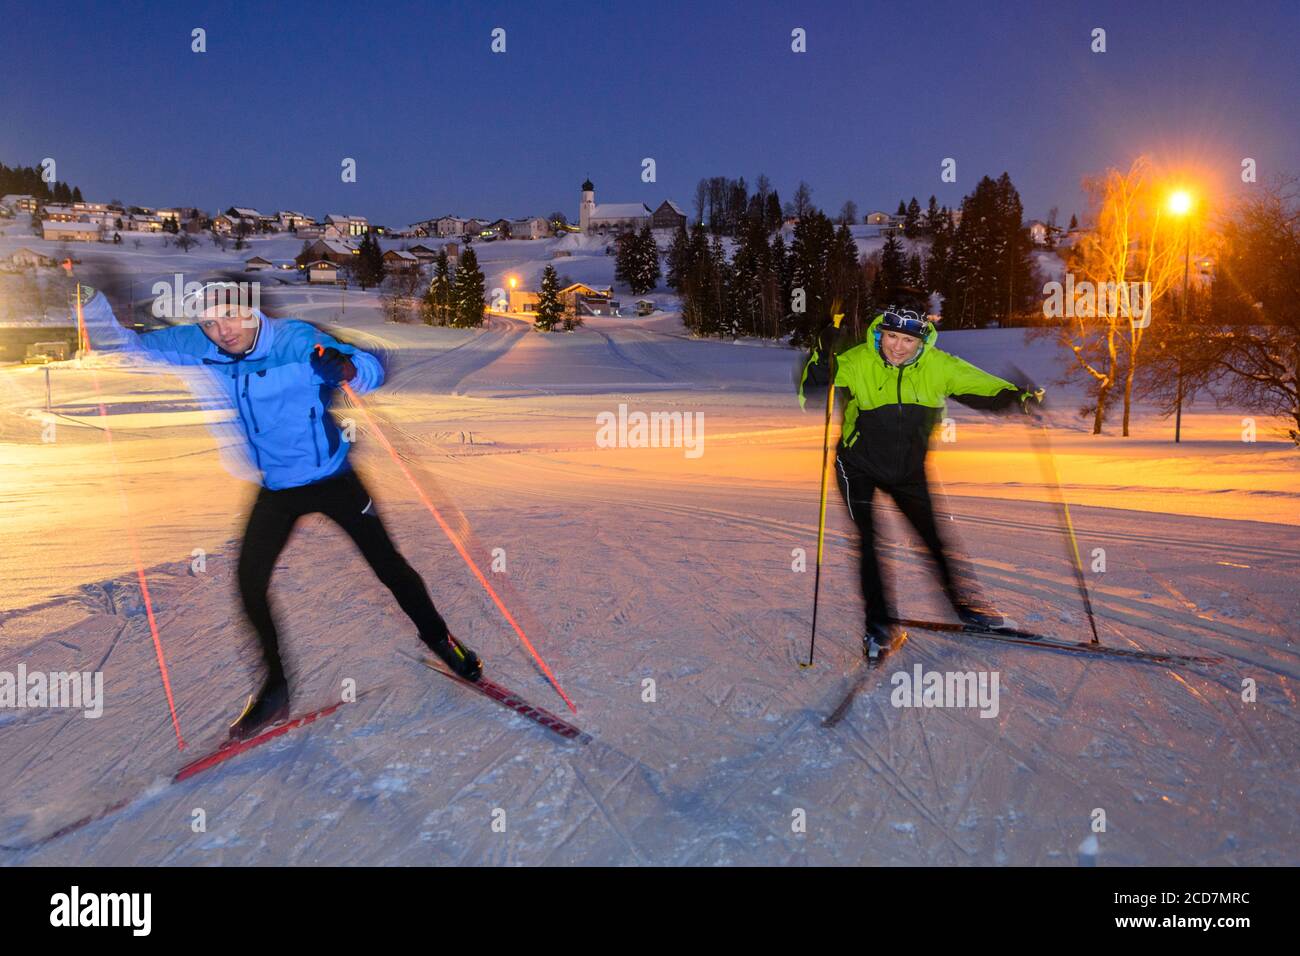 Two skiers doing a skating exercise on winter evening on floodlight slopes Stock Photo